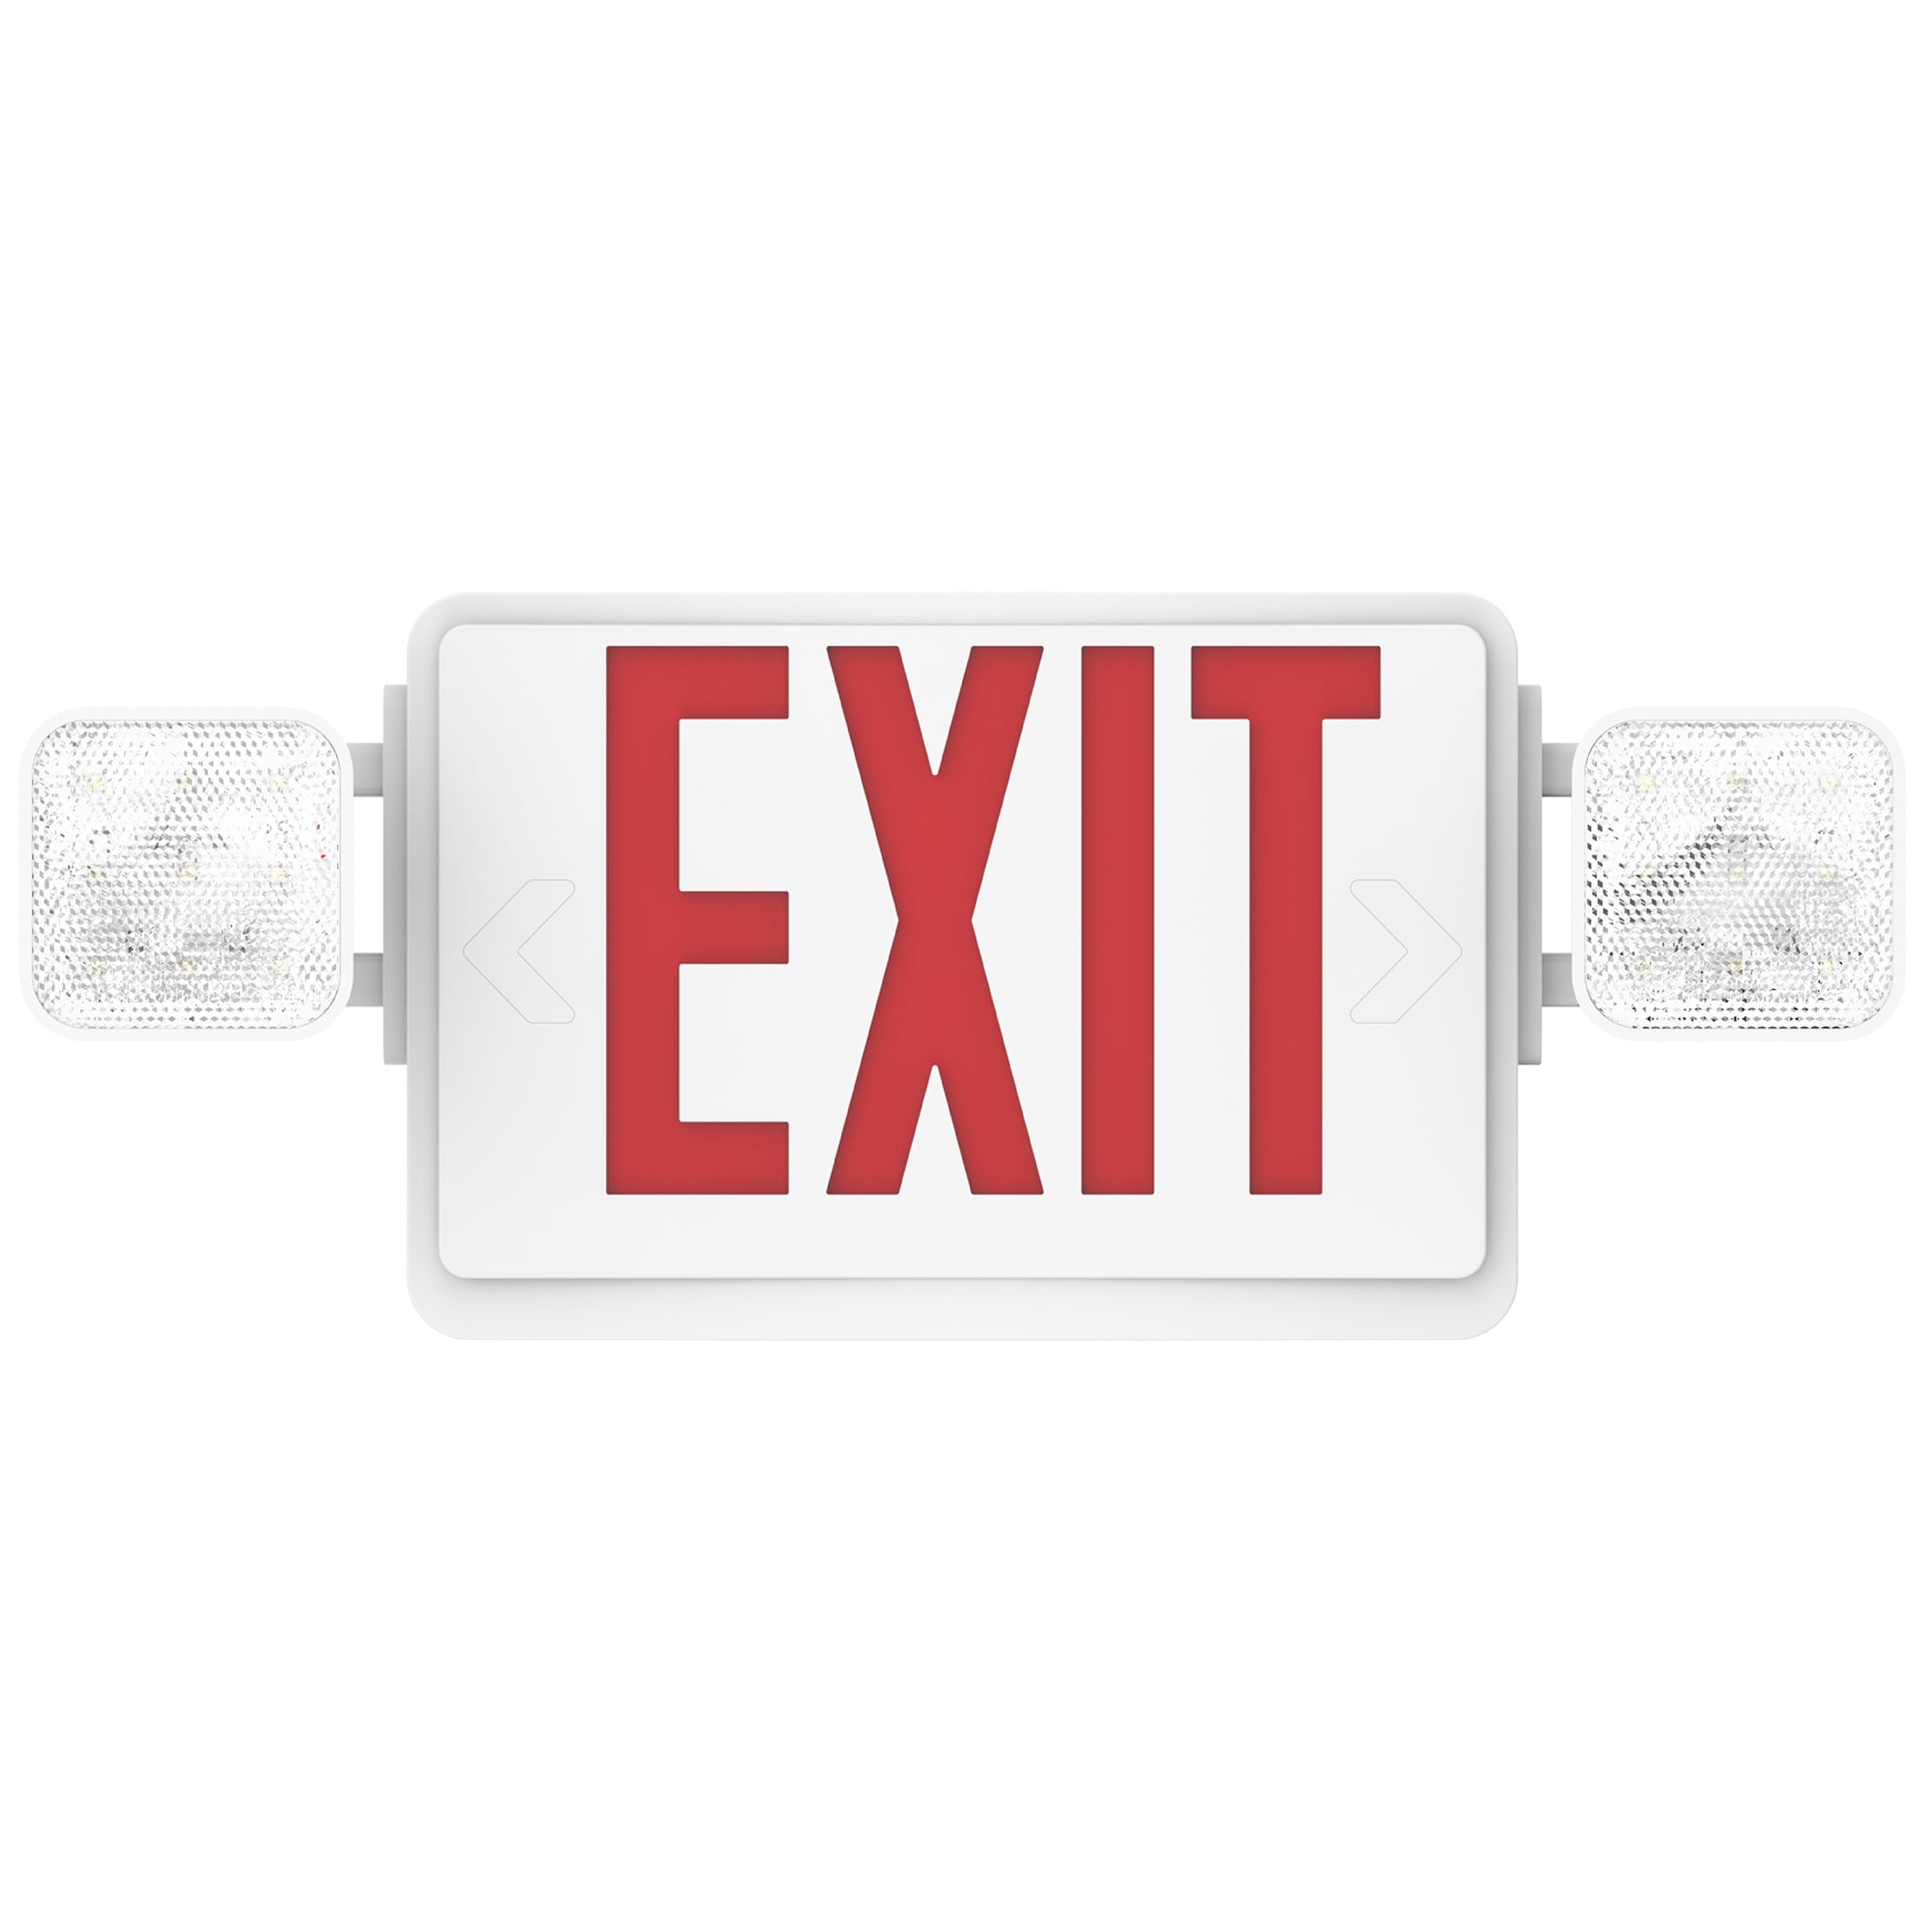 The Sunco 2 Head LED Exit Sign features a bright US standard red letter signage with knockout directional arrows and 2 faceplates so you can either mount it on a ceiling or on a wall. Includes 2 LED heads or LED lamps on either side of the sign that are adjustable. Reposition them to shine the emergency light where you need it during a power outage. Includes a 90-minute backup battery for emergency safety light in indoor, high traffic areas.